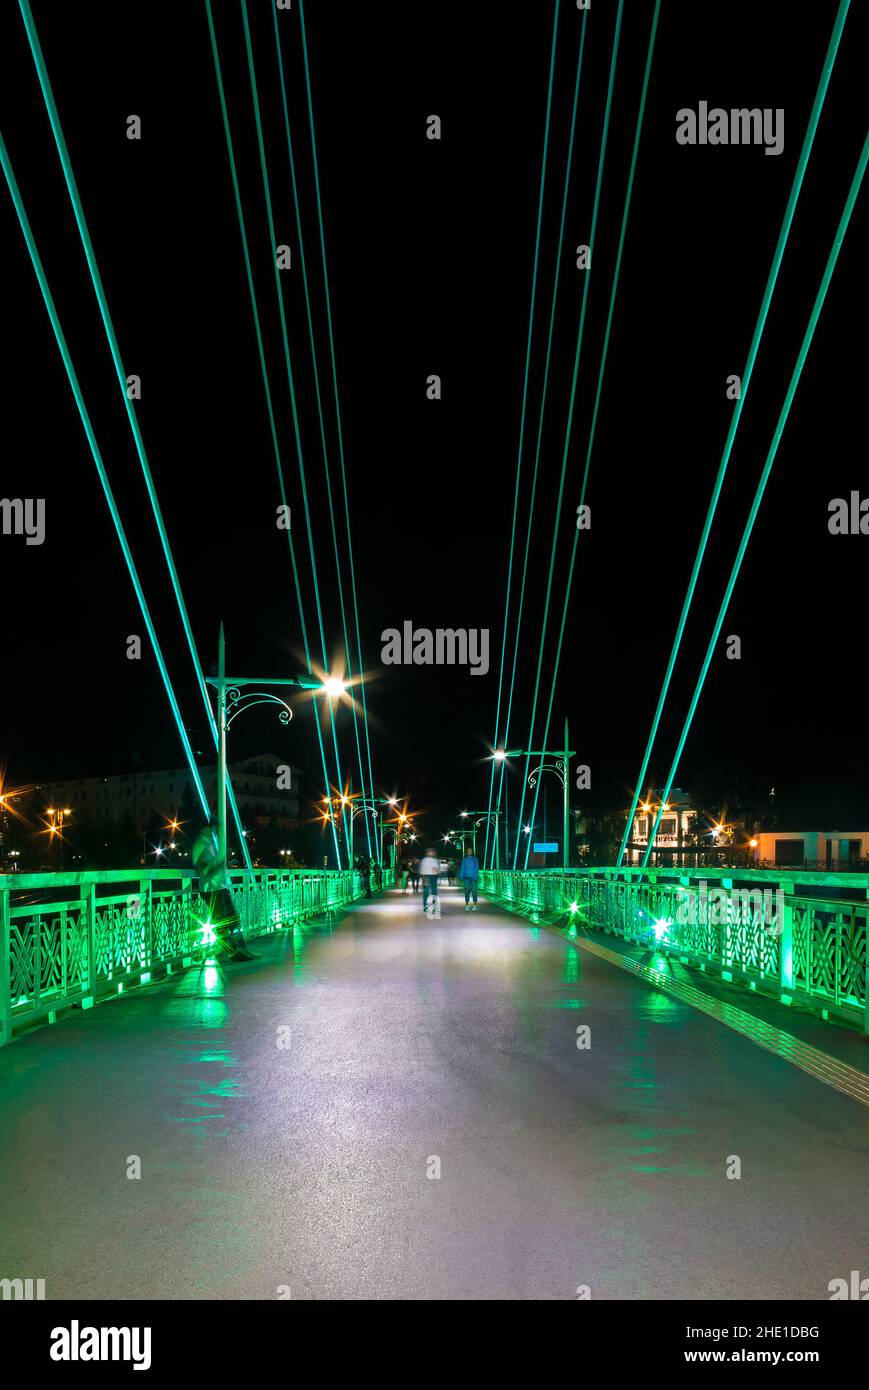 Perspective view of illuminated span of the Bridge of Lovers with people blurred in motion at night, Tyumen, Russia Stock Photo